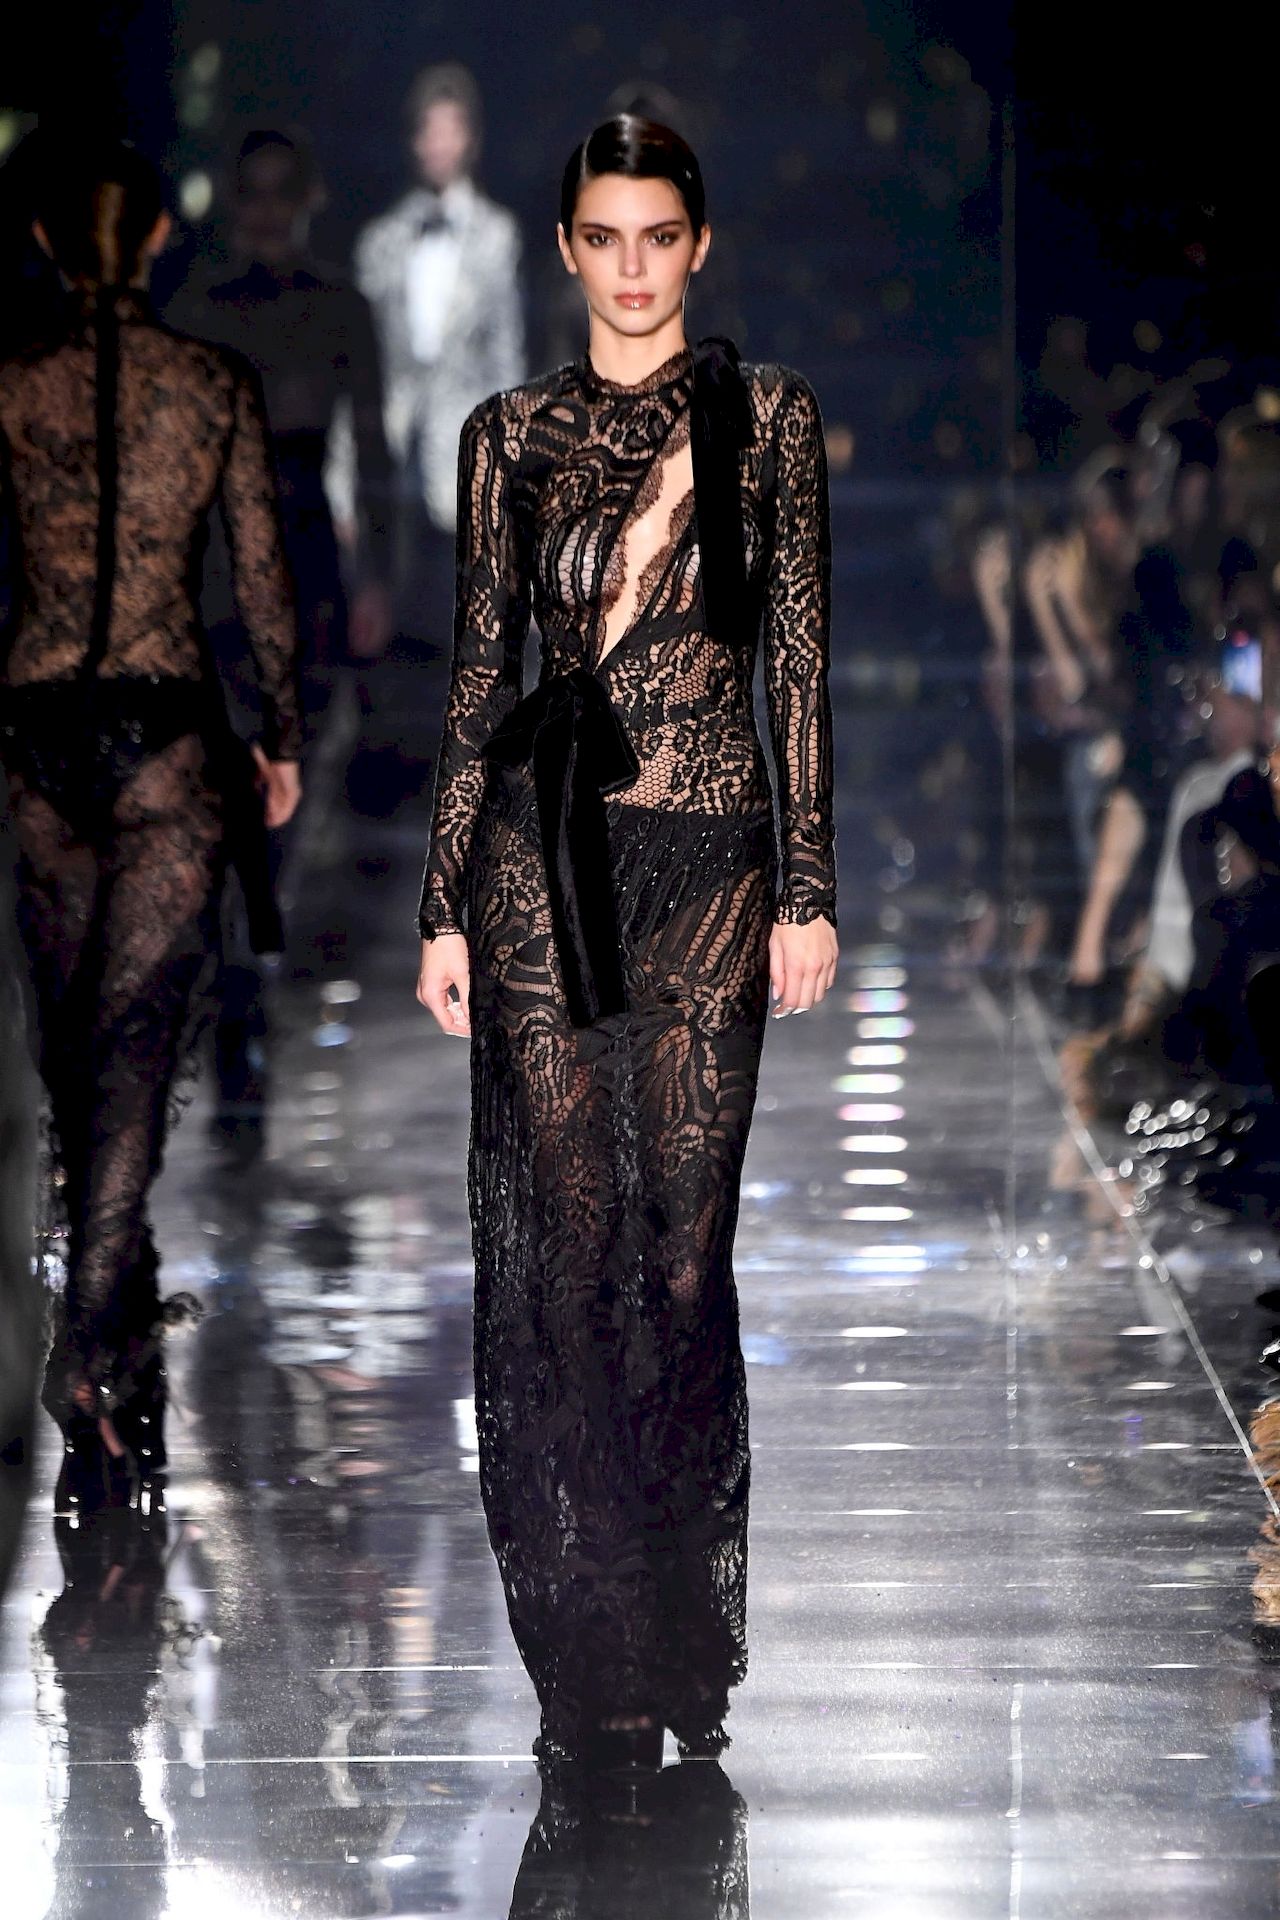 Kendall-Jenner-Walks-the-Runway-During-the-Tom-Ford-Show-0011.jpg